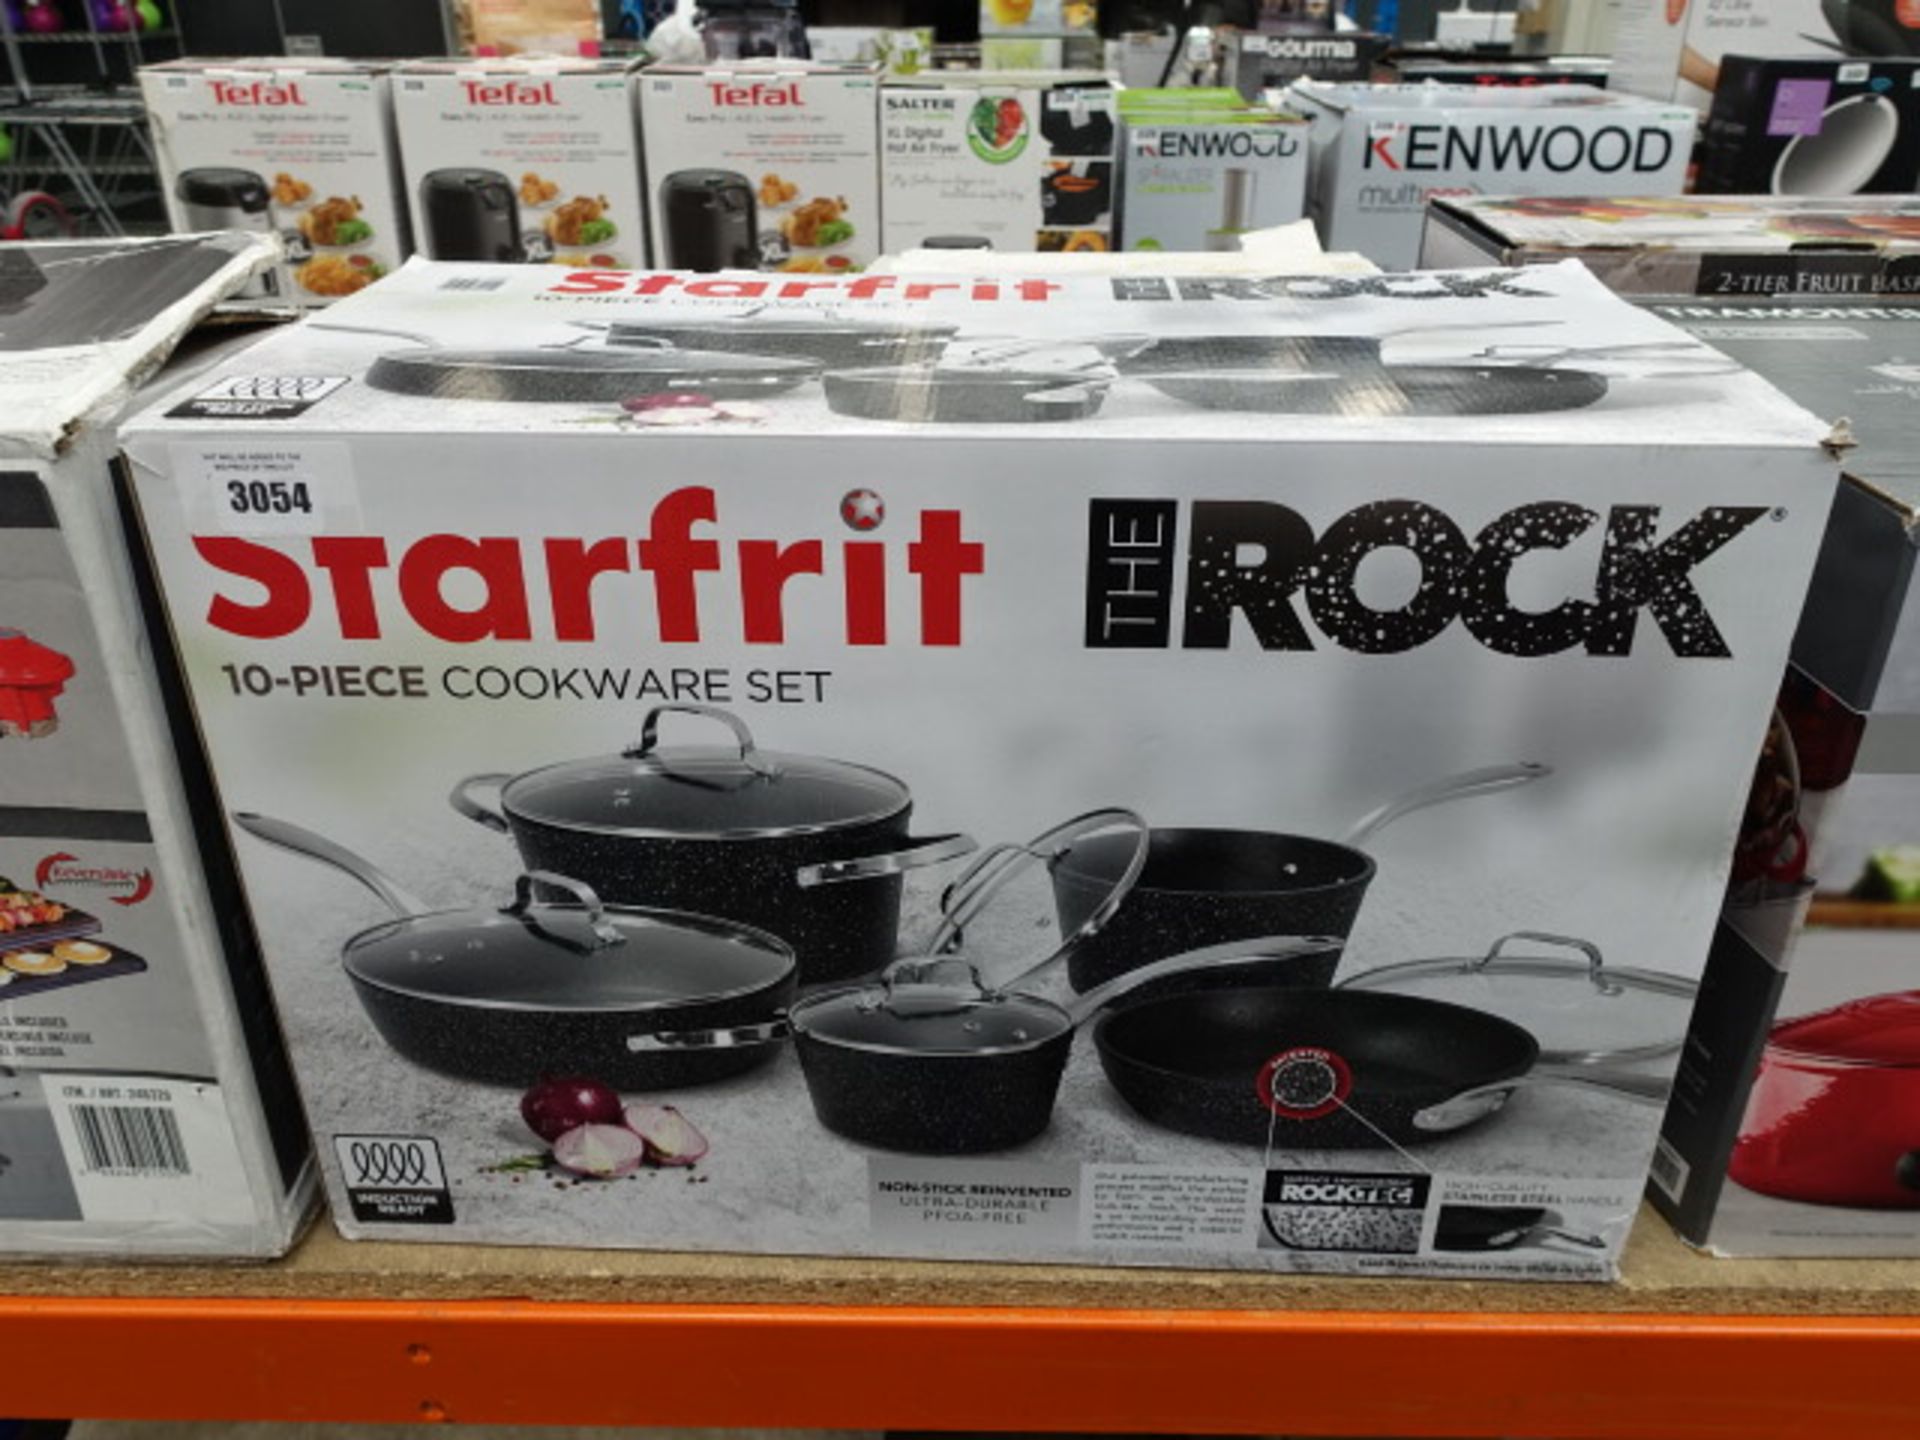 Boxed Starfrit The Rock cookware set